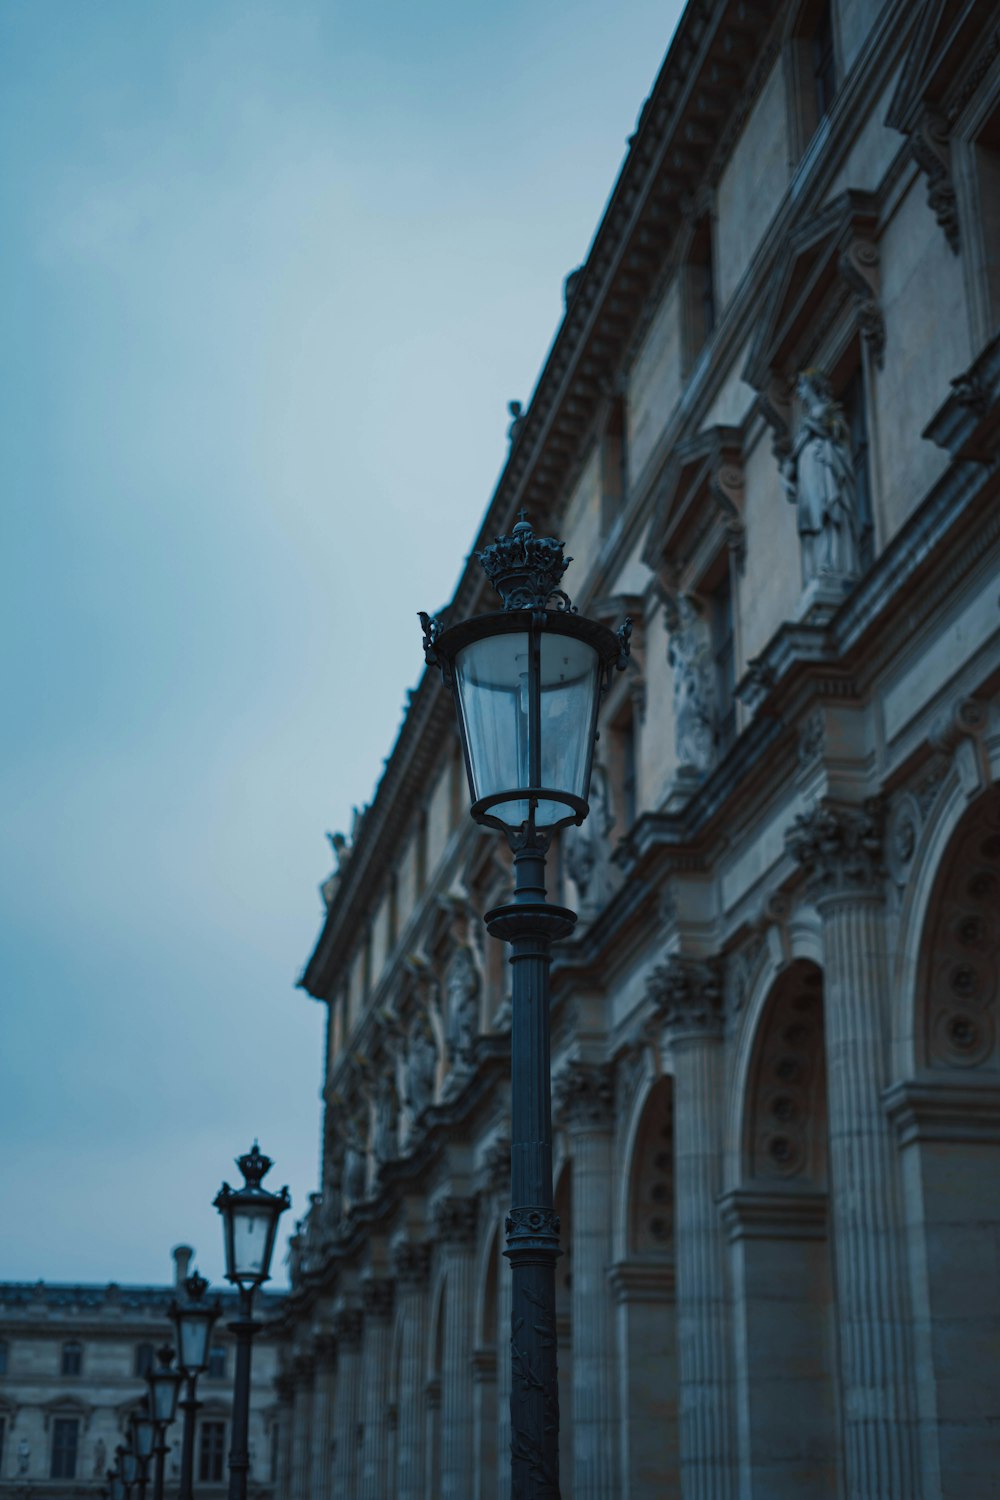 a street light in front of a building